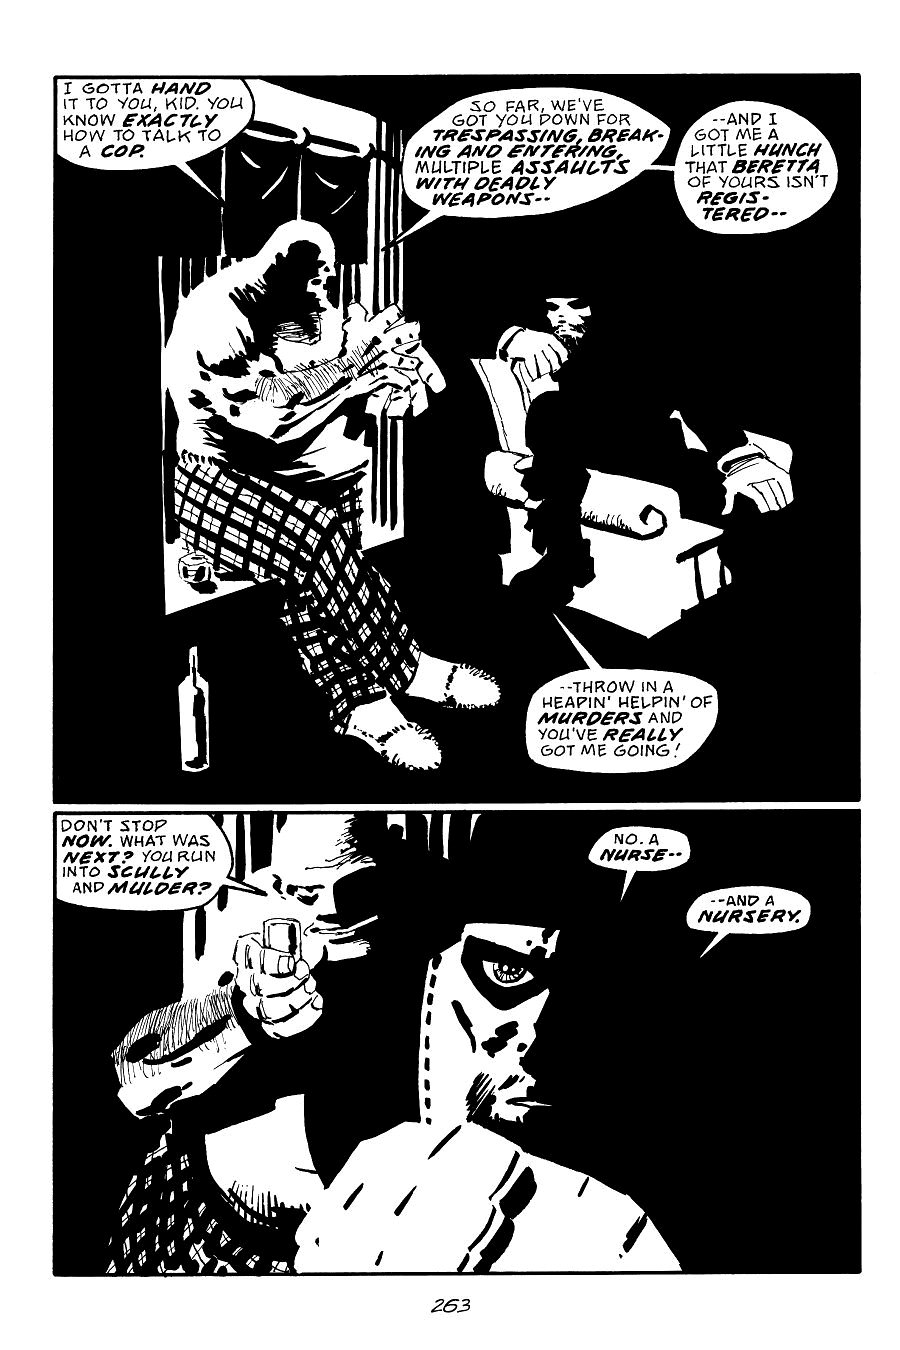 page 263 of sin city 7 hell and back